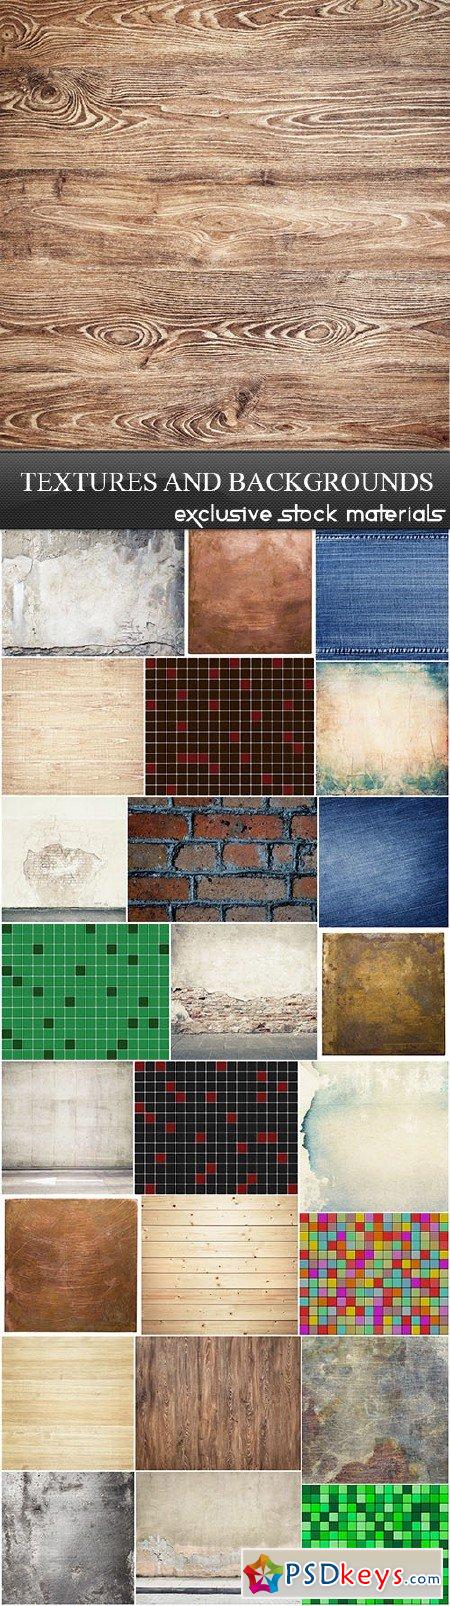 Textures and Backgrounds 25xUHQ JPEG